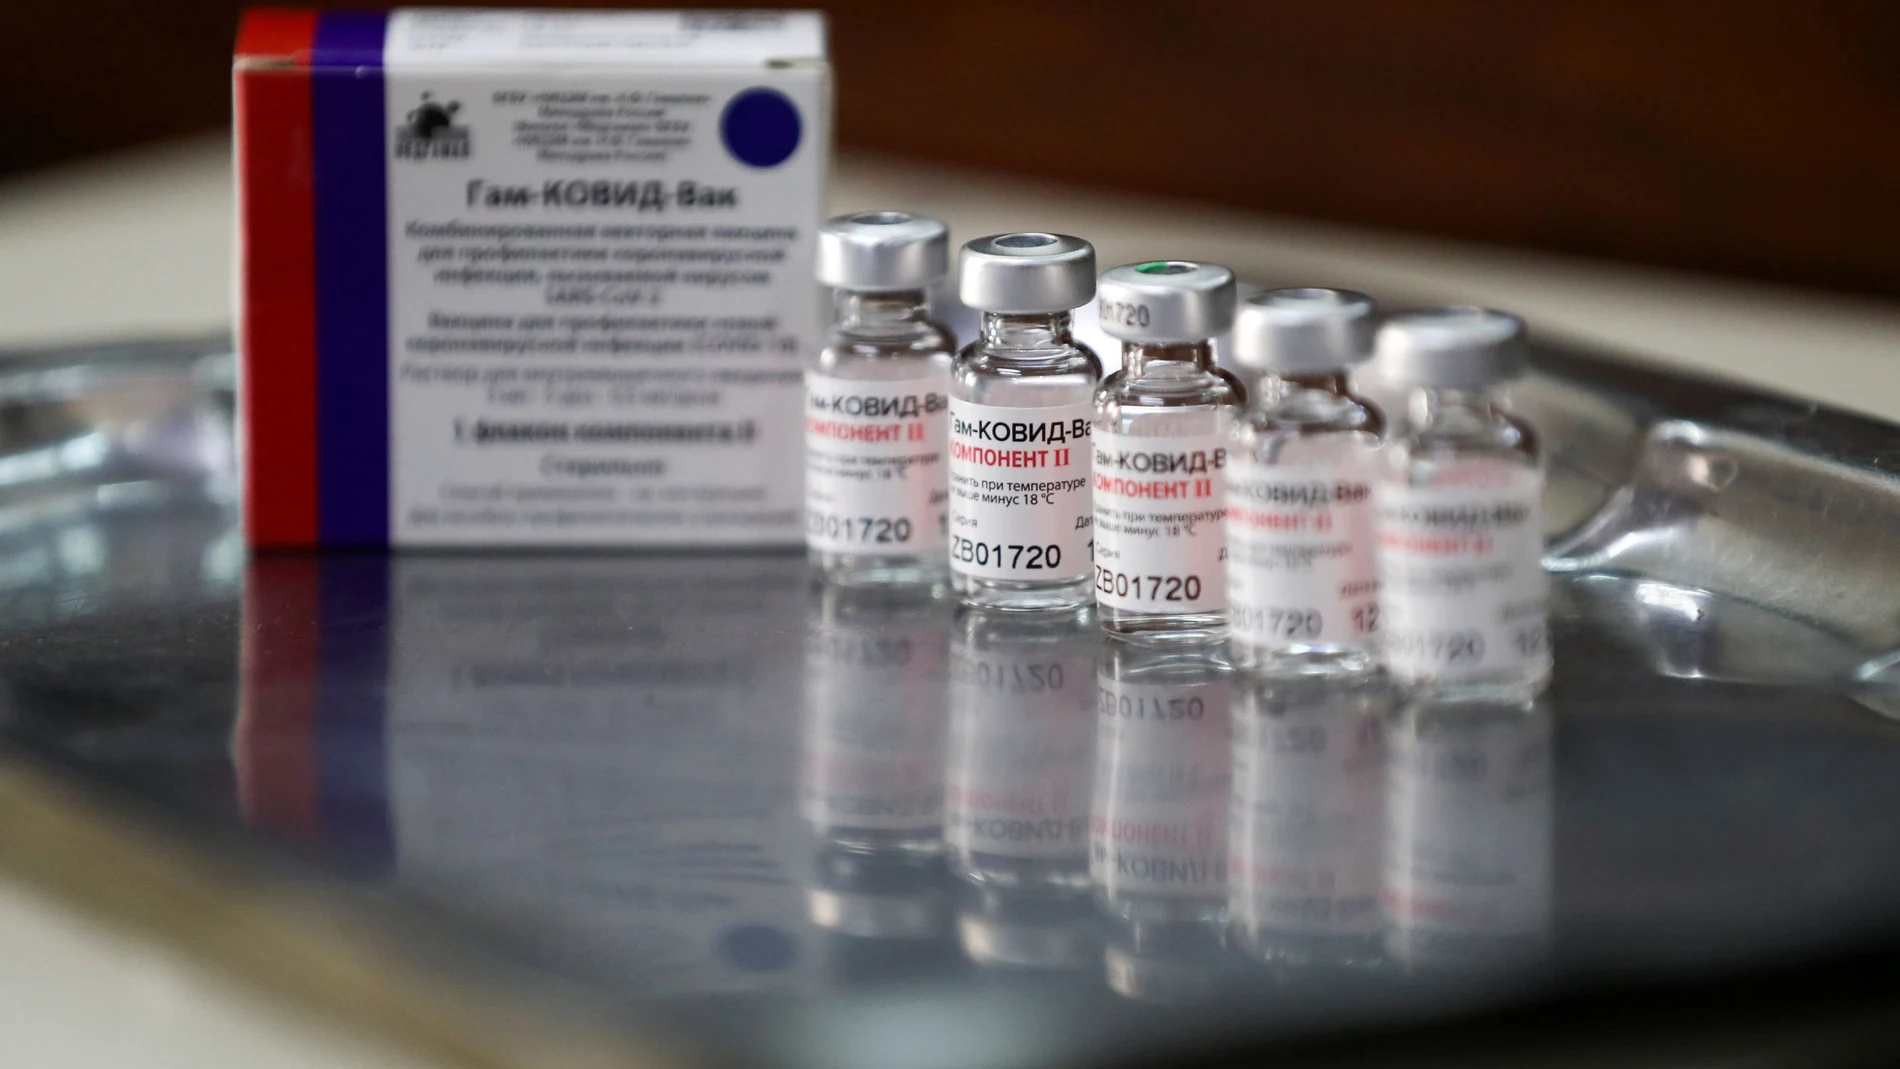 FILE PHOTO: Empty vials of the second dose of the Sputnik V (Gam-COVID-Vac) vaccine are pictured at the San Martin hospital, in La Plata, on the outskirts of Buenos Aires, Argentina January 21, 2021. REUTERS/Agustin Marcarian/File Photo